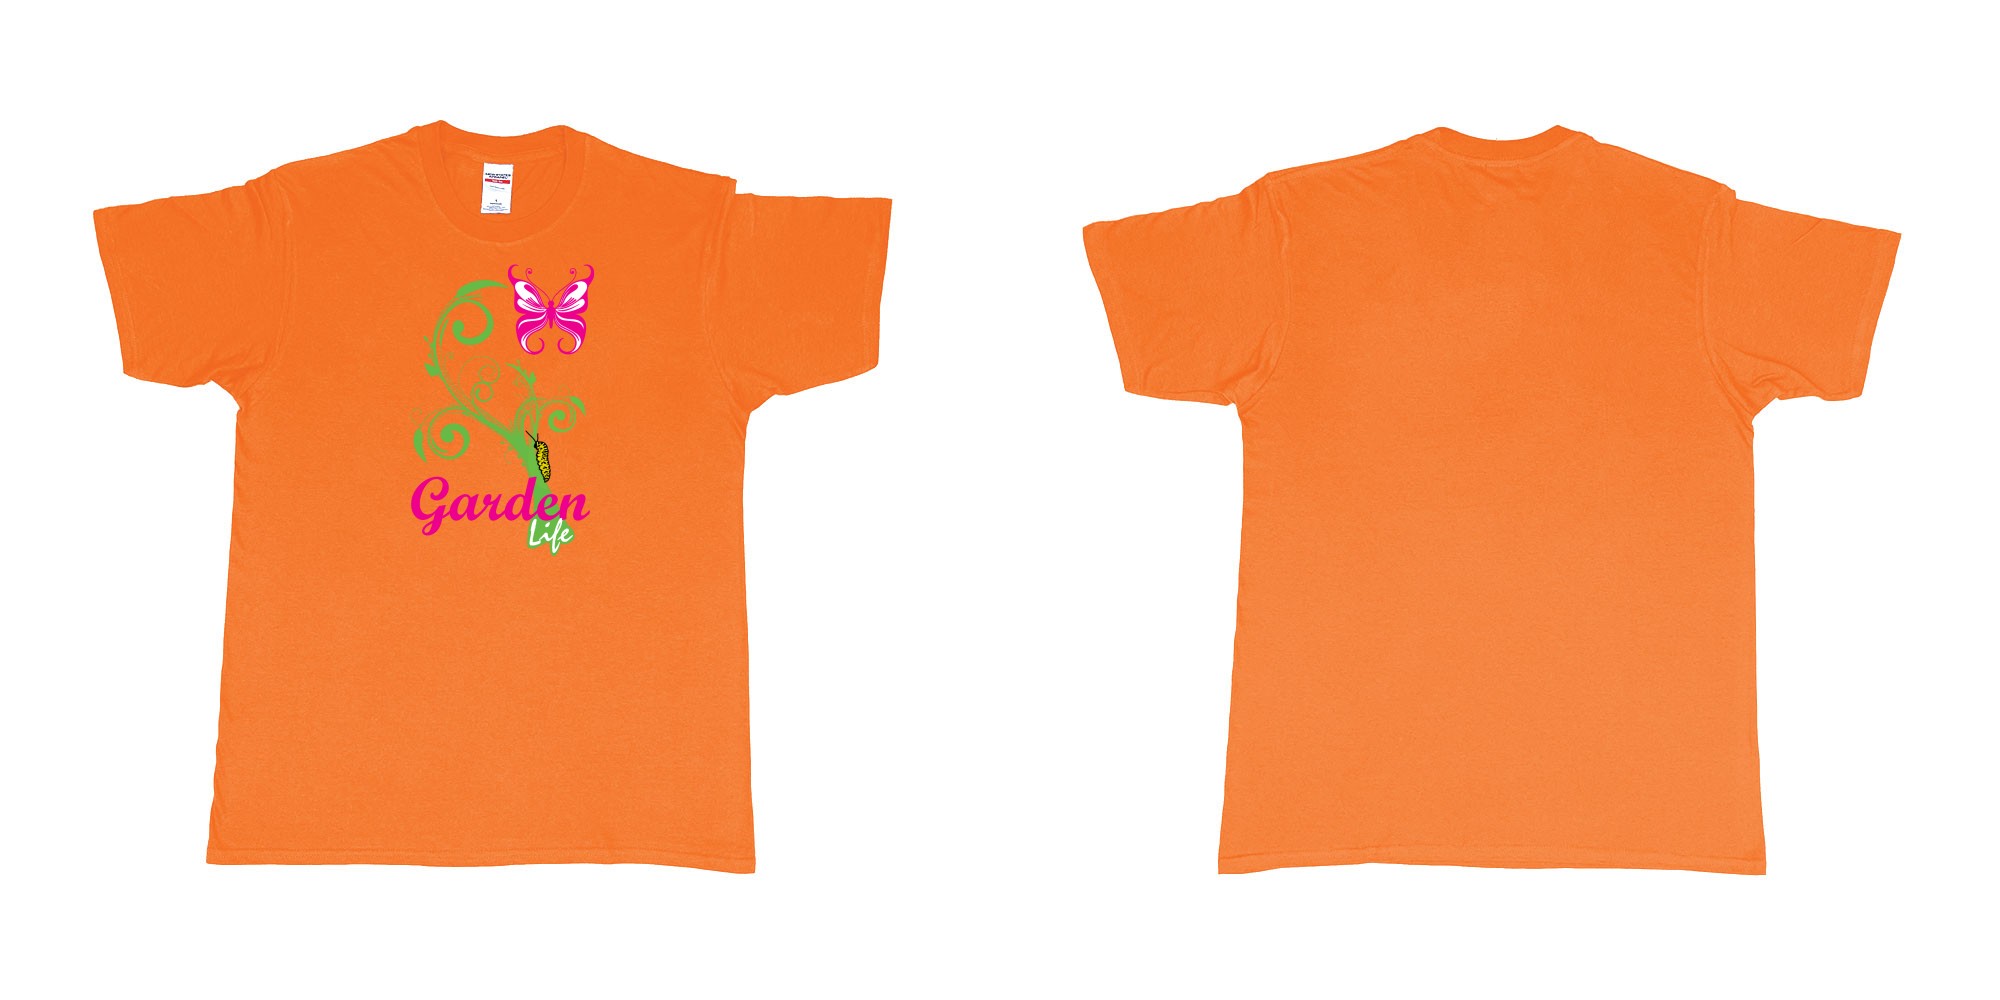 Custom tshirt design garden life transformation from a caterpillar and a butterfly in fabric color orange choice your own text made in Bali by The Pirate Way